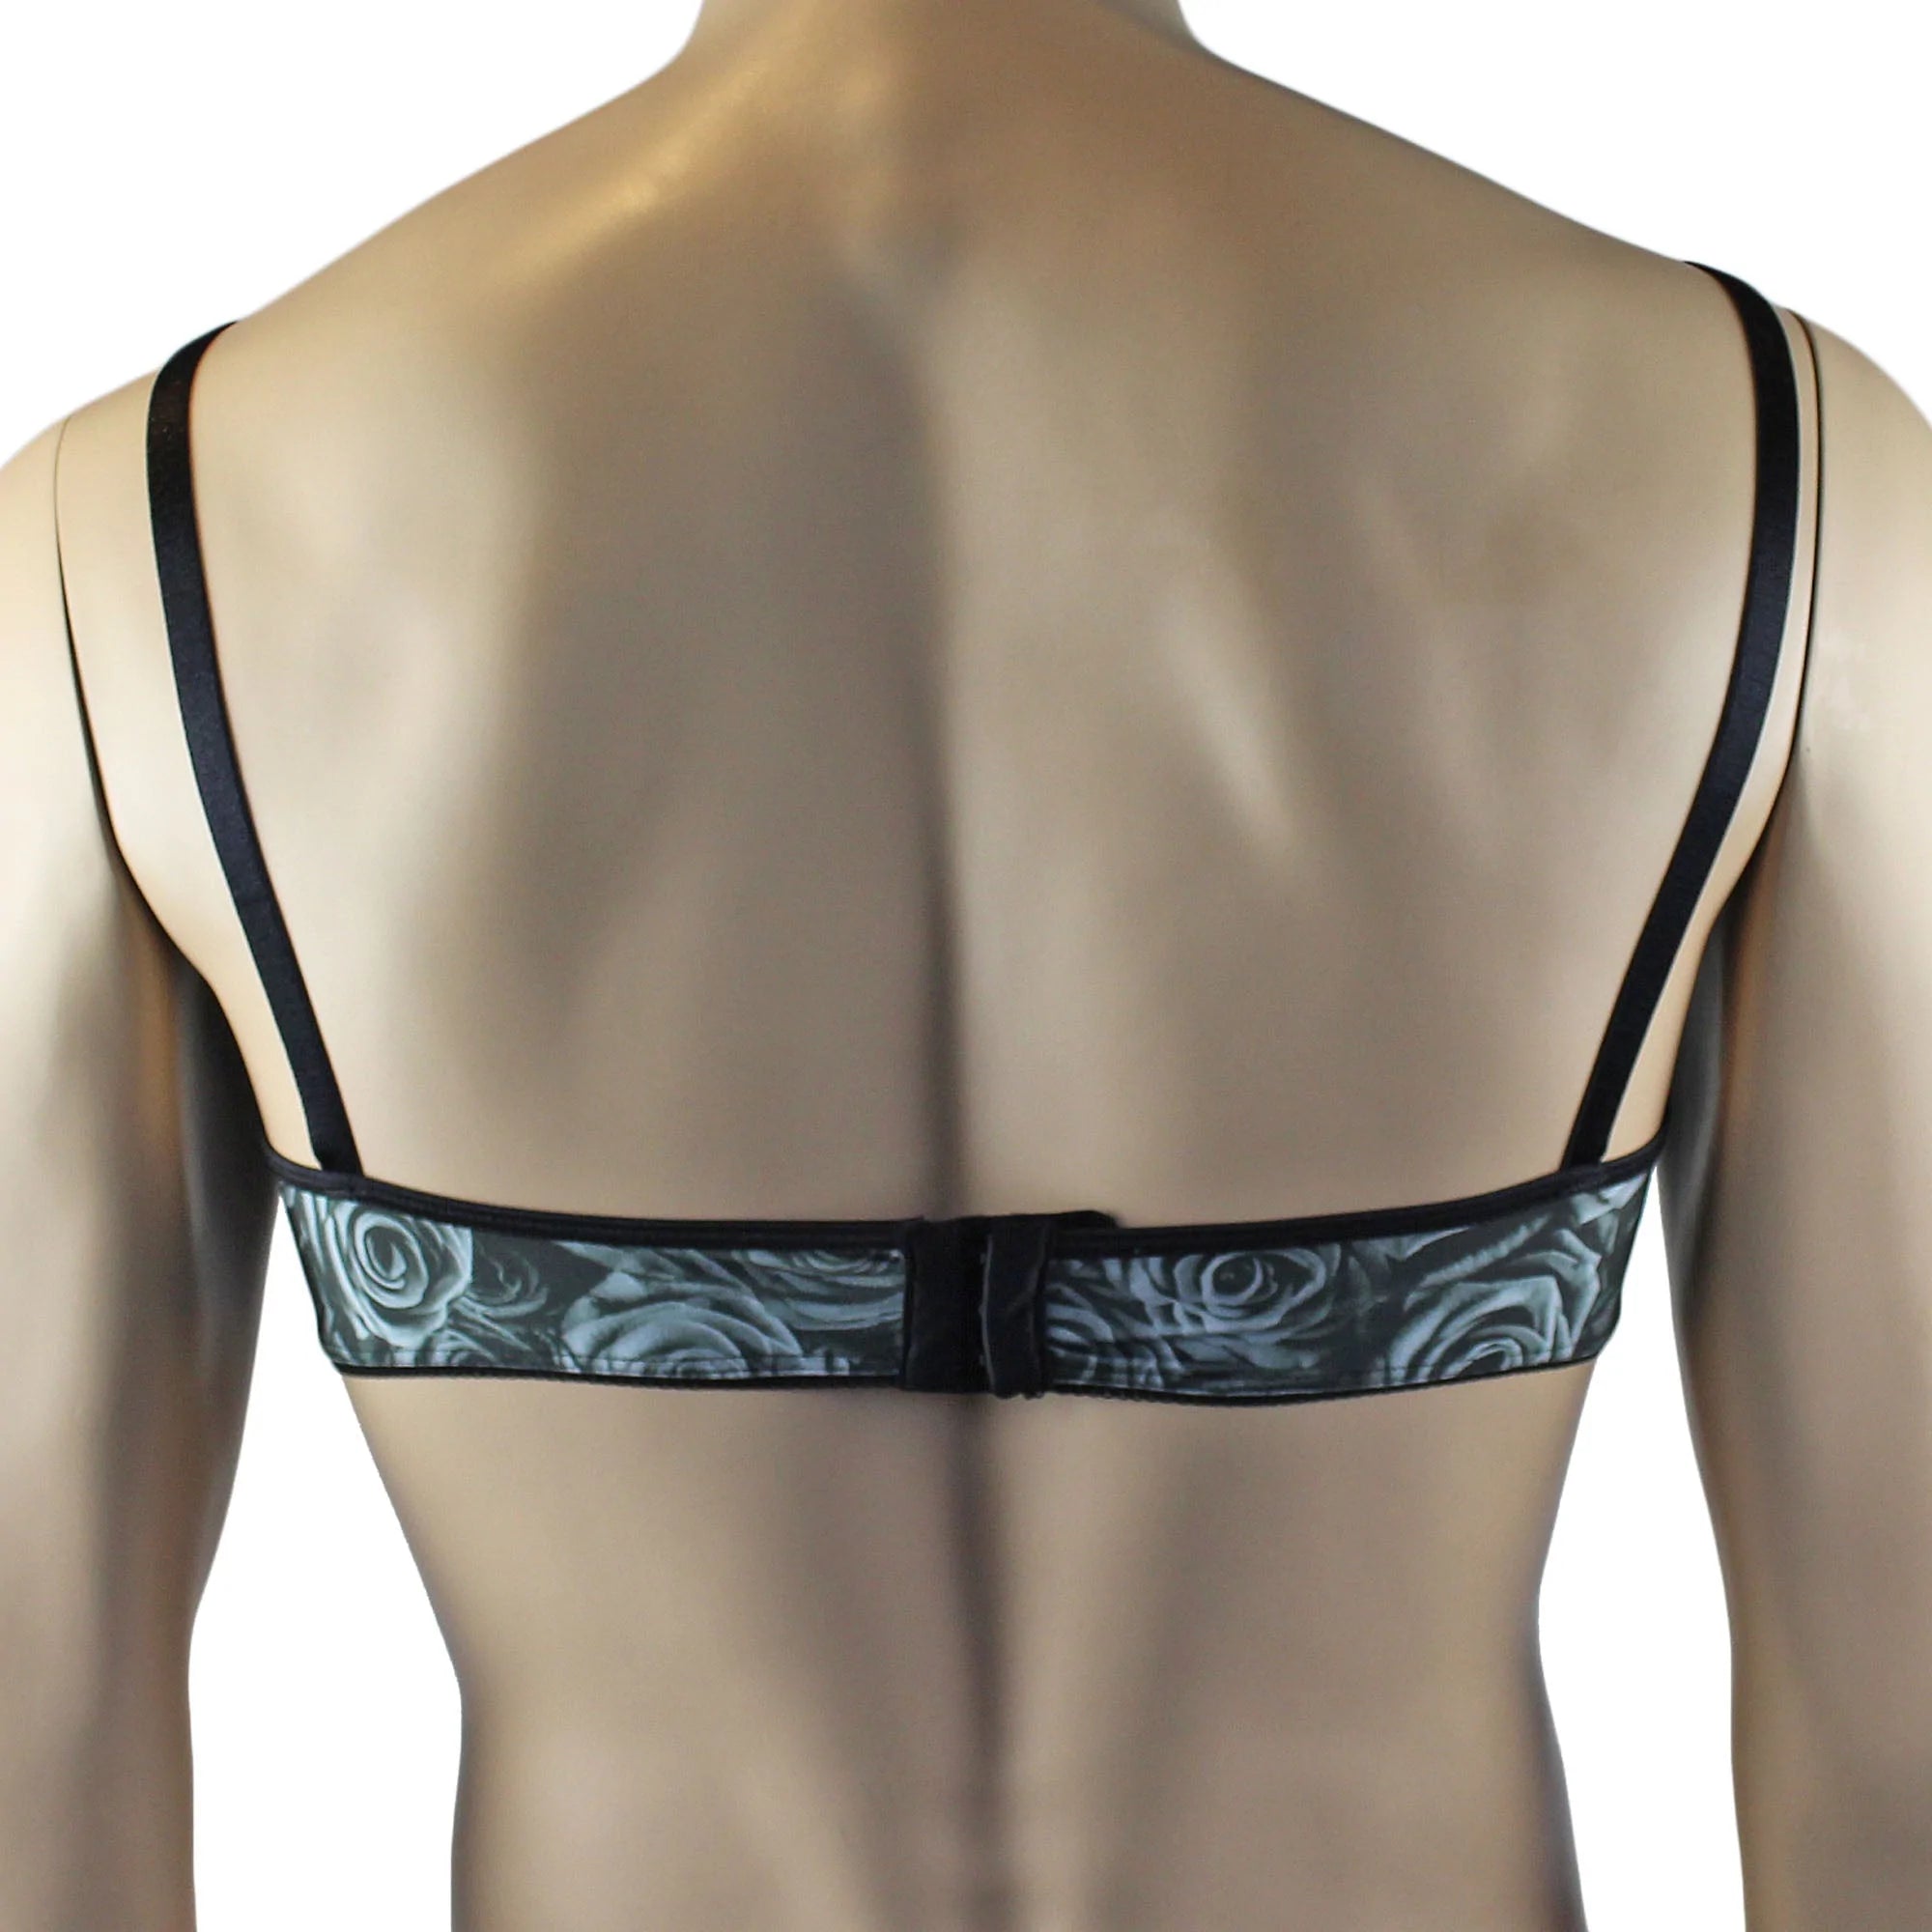 SALE - Mens Roses Spandex Bra Top with Frilled Pico Elastic Trim Male Lingerie Grey